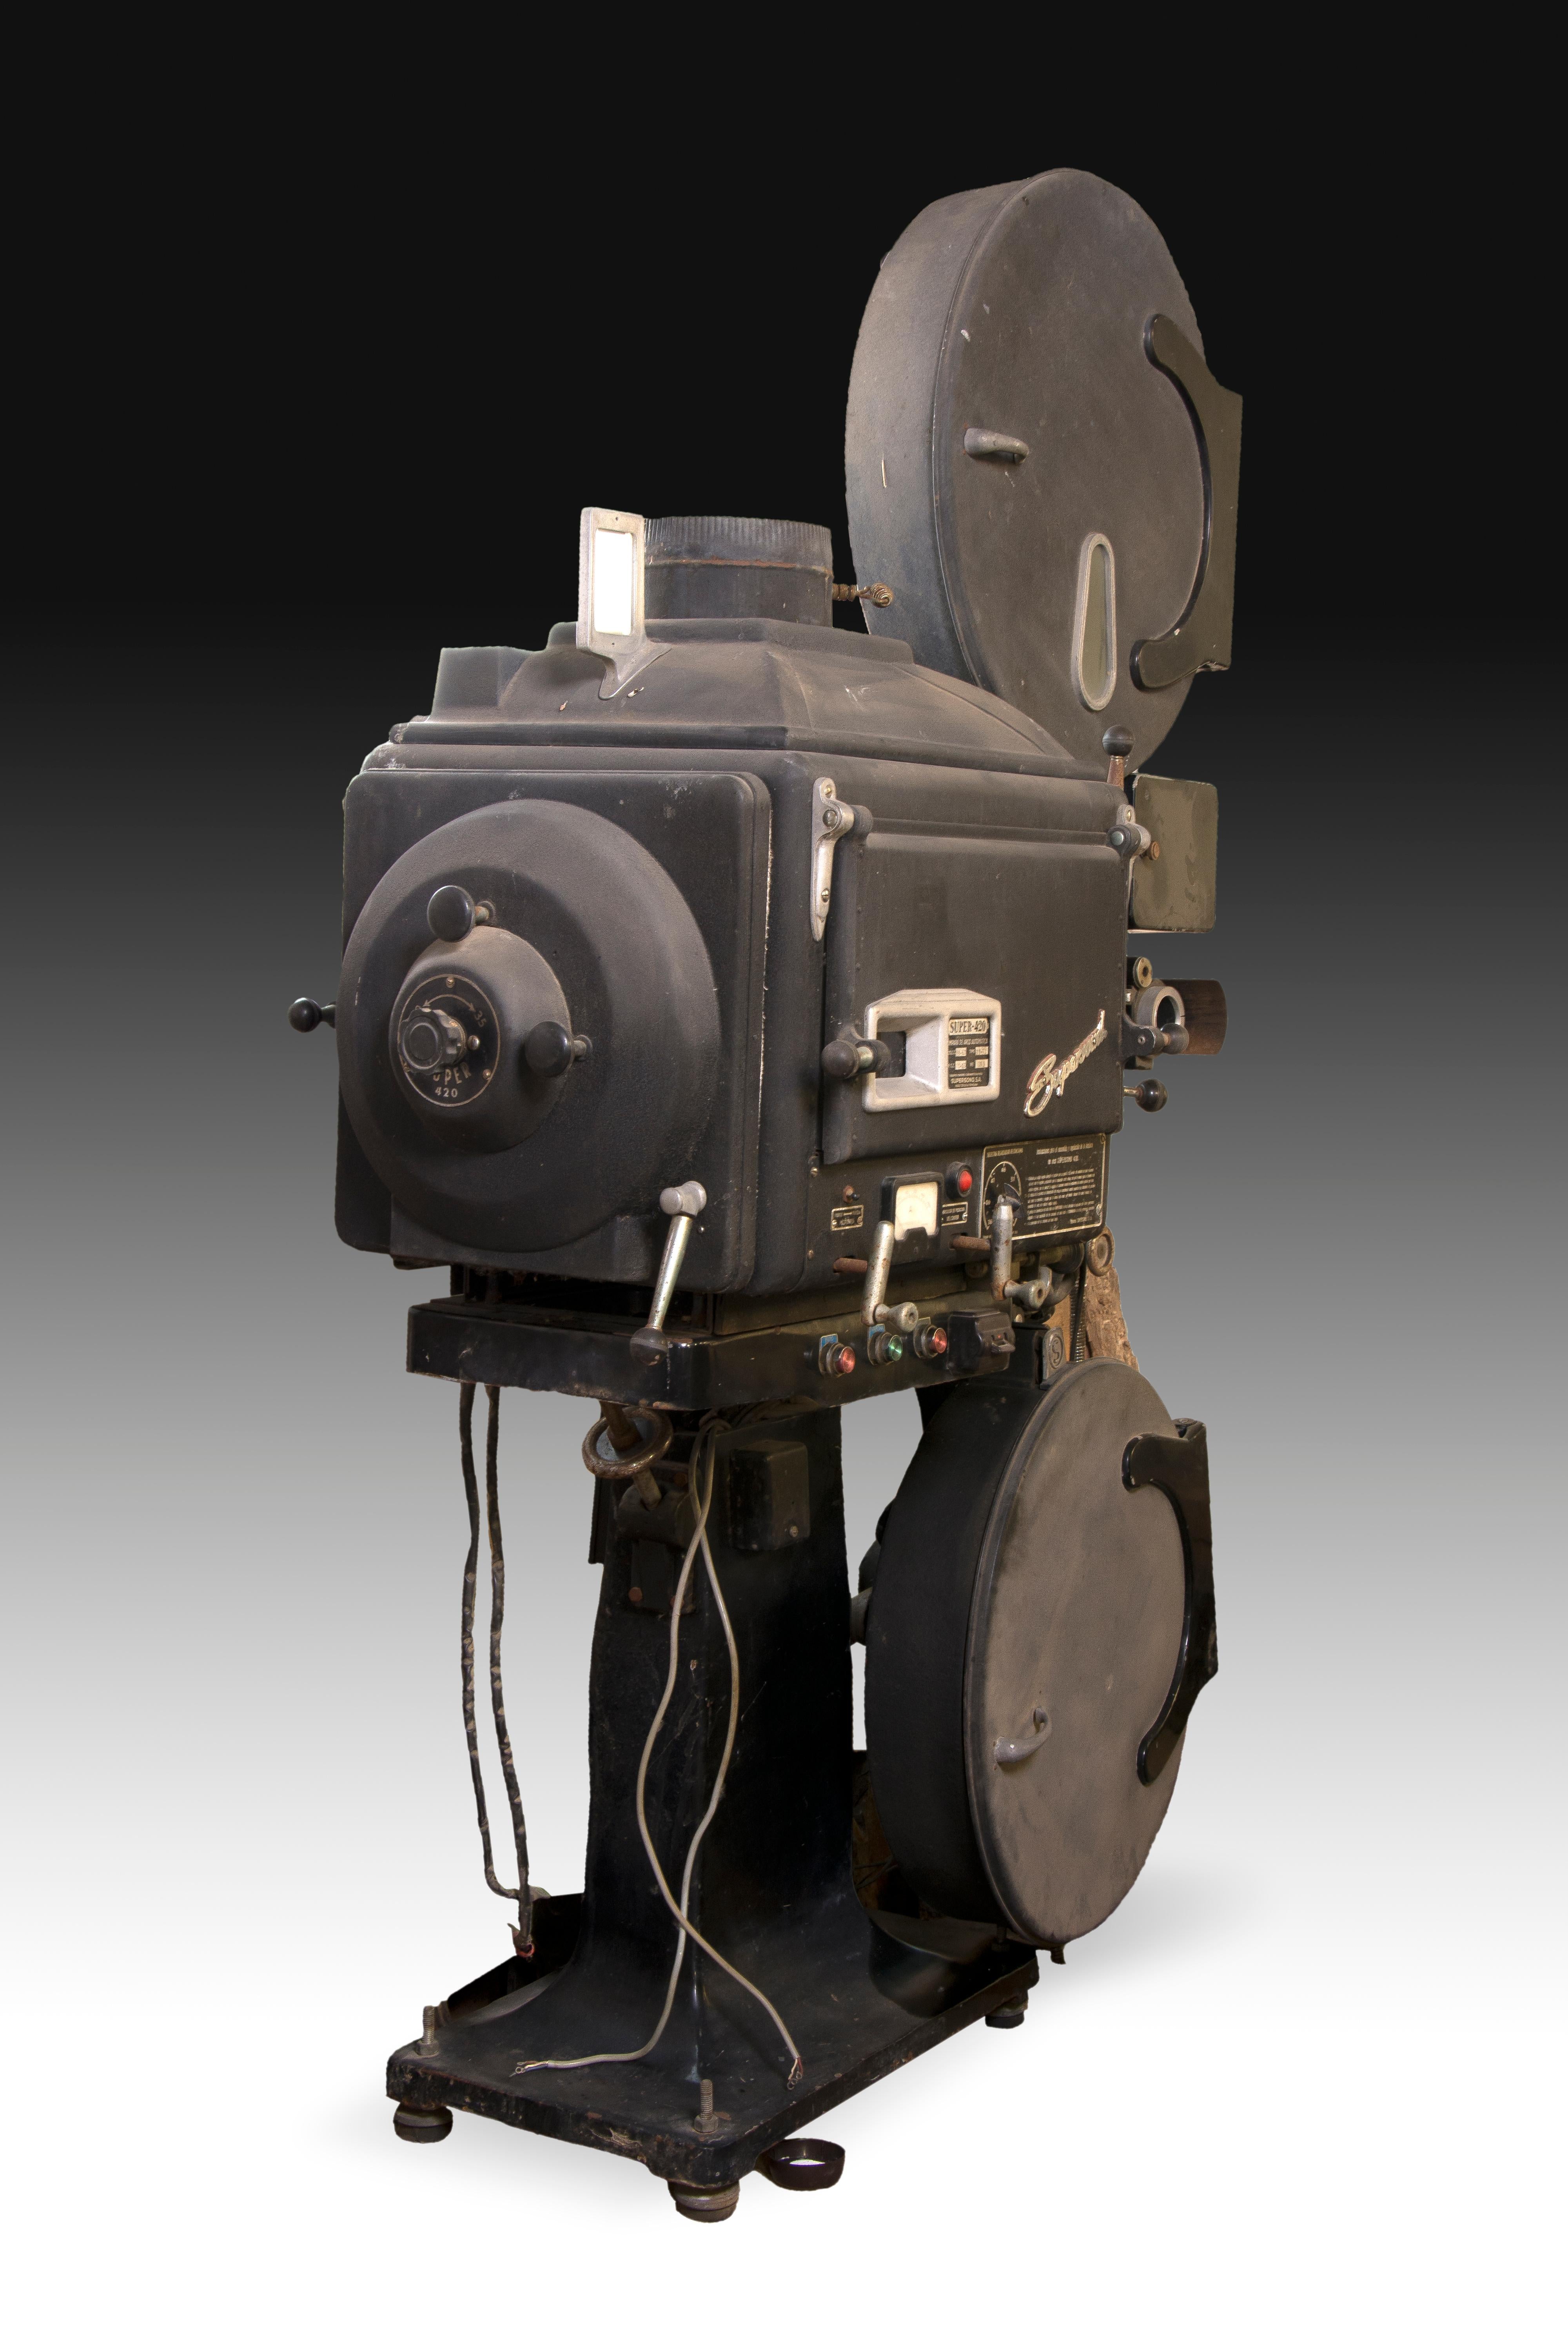 Super Sirius Cinema proyector. Equipos de Proyección y Sonido Supersond, Spain, 20th century.
Film projector built by the Supersond cinematographic sound equipment factory in Barcelona. A model from 1962 very similar to the present one, conserved